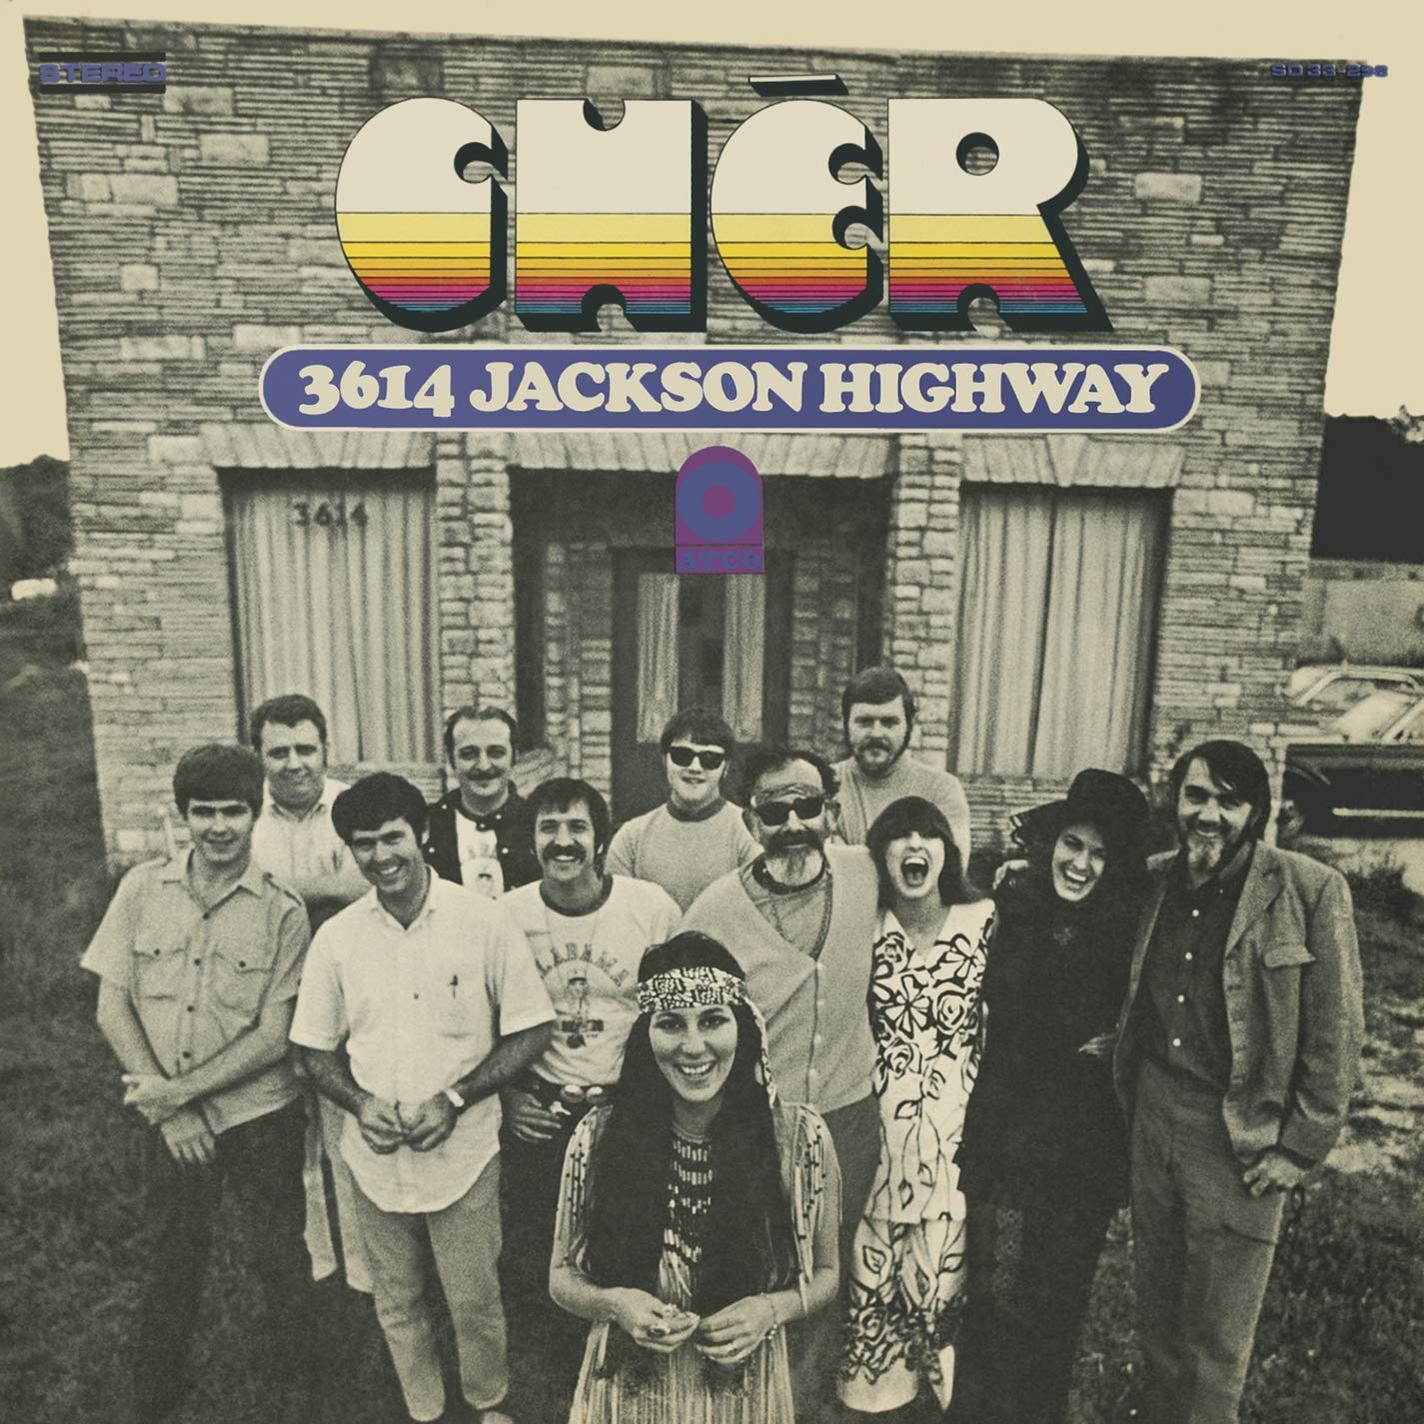 Cher - 3614 Jackson Edition) (Vinyl) Highway - (Expanded